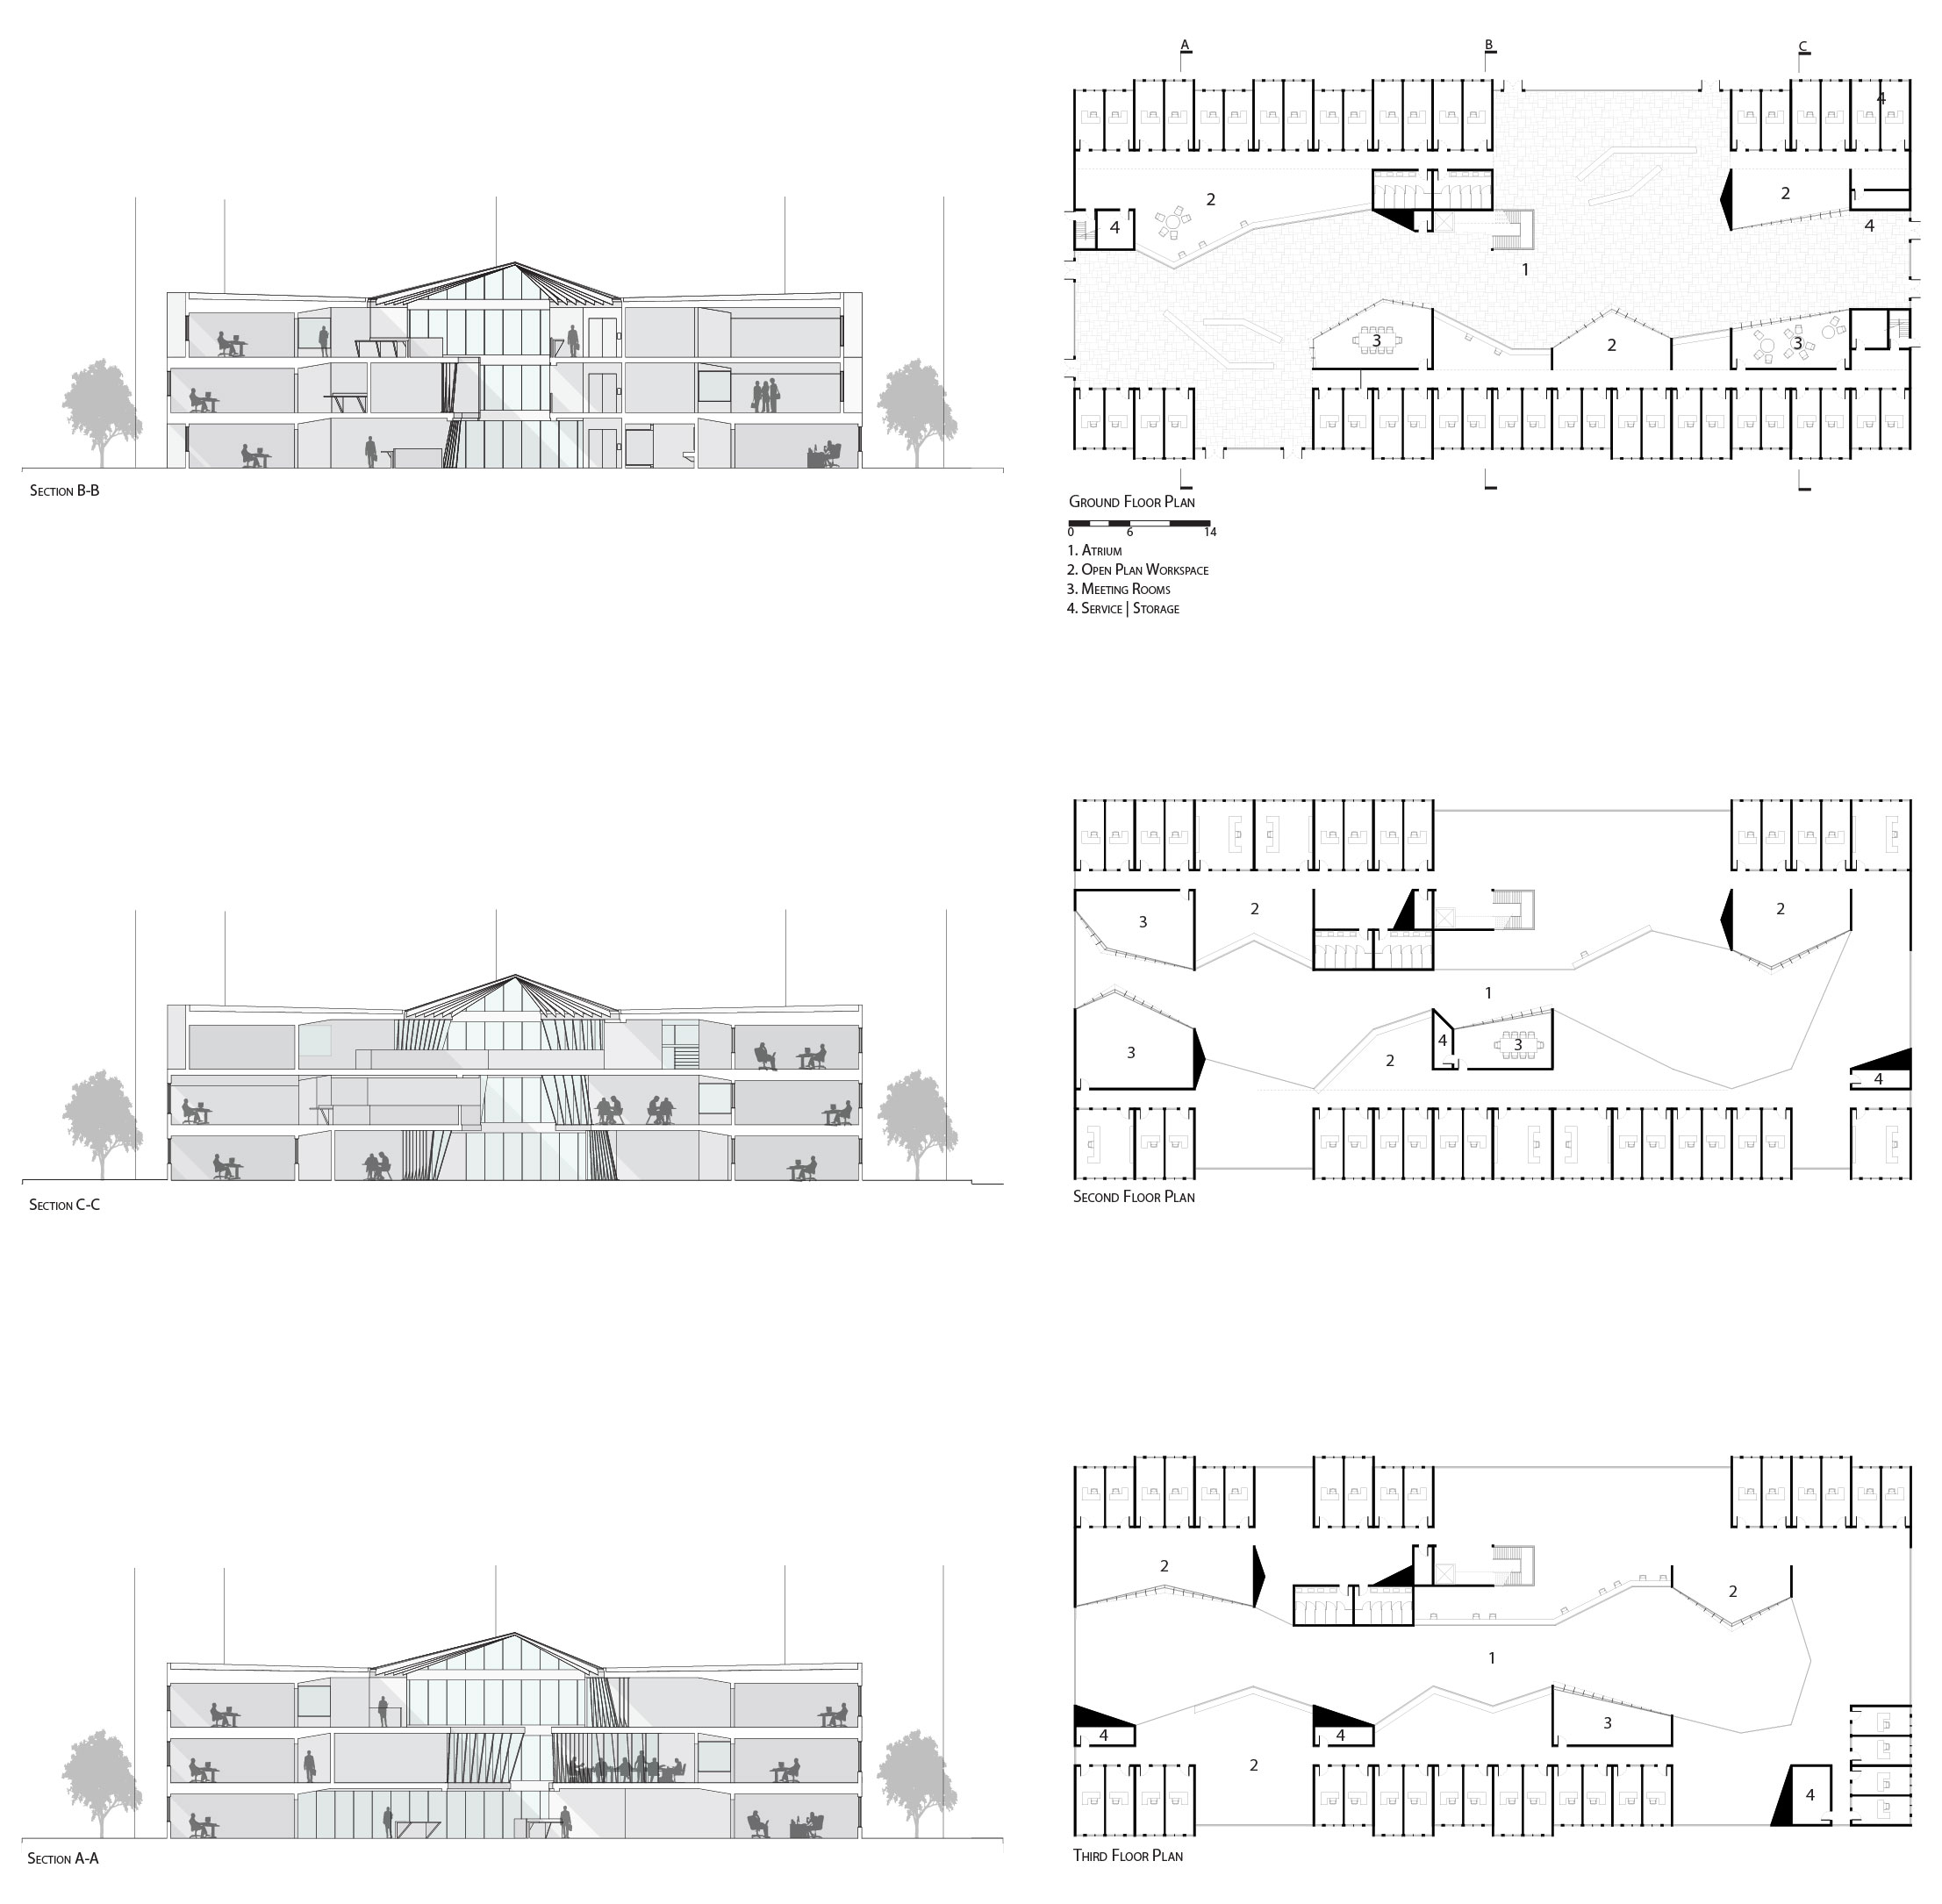 plans and sections side by side